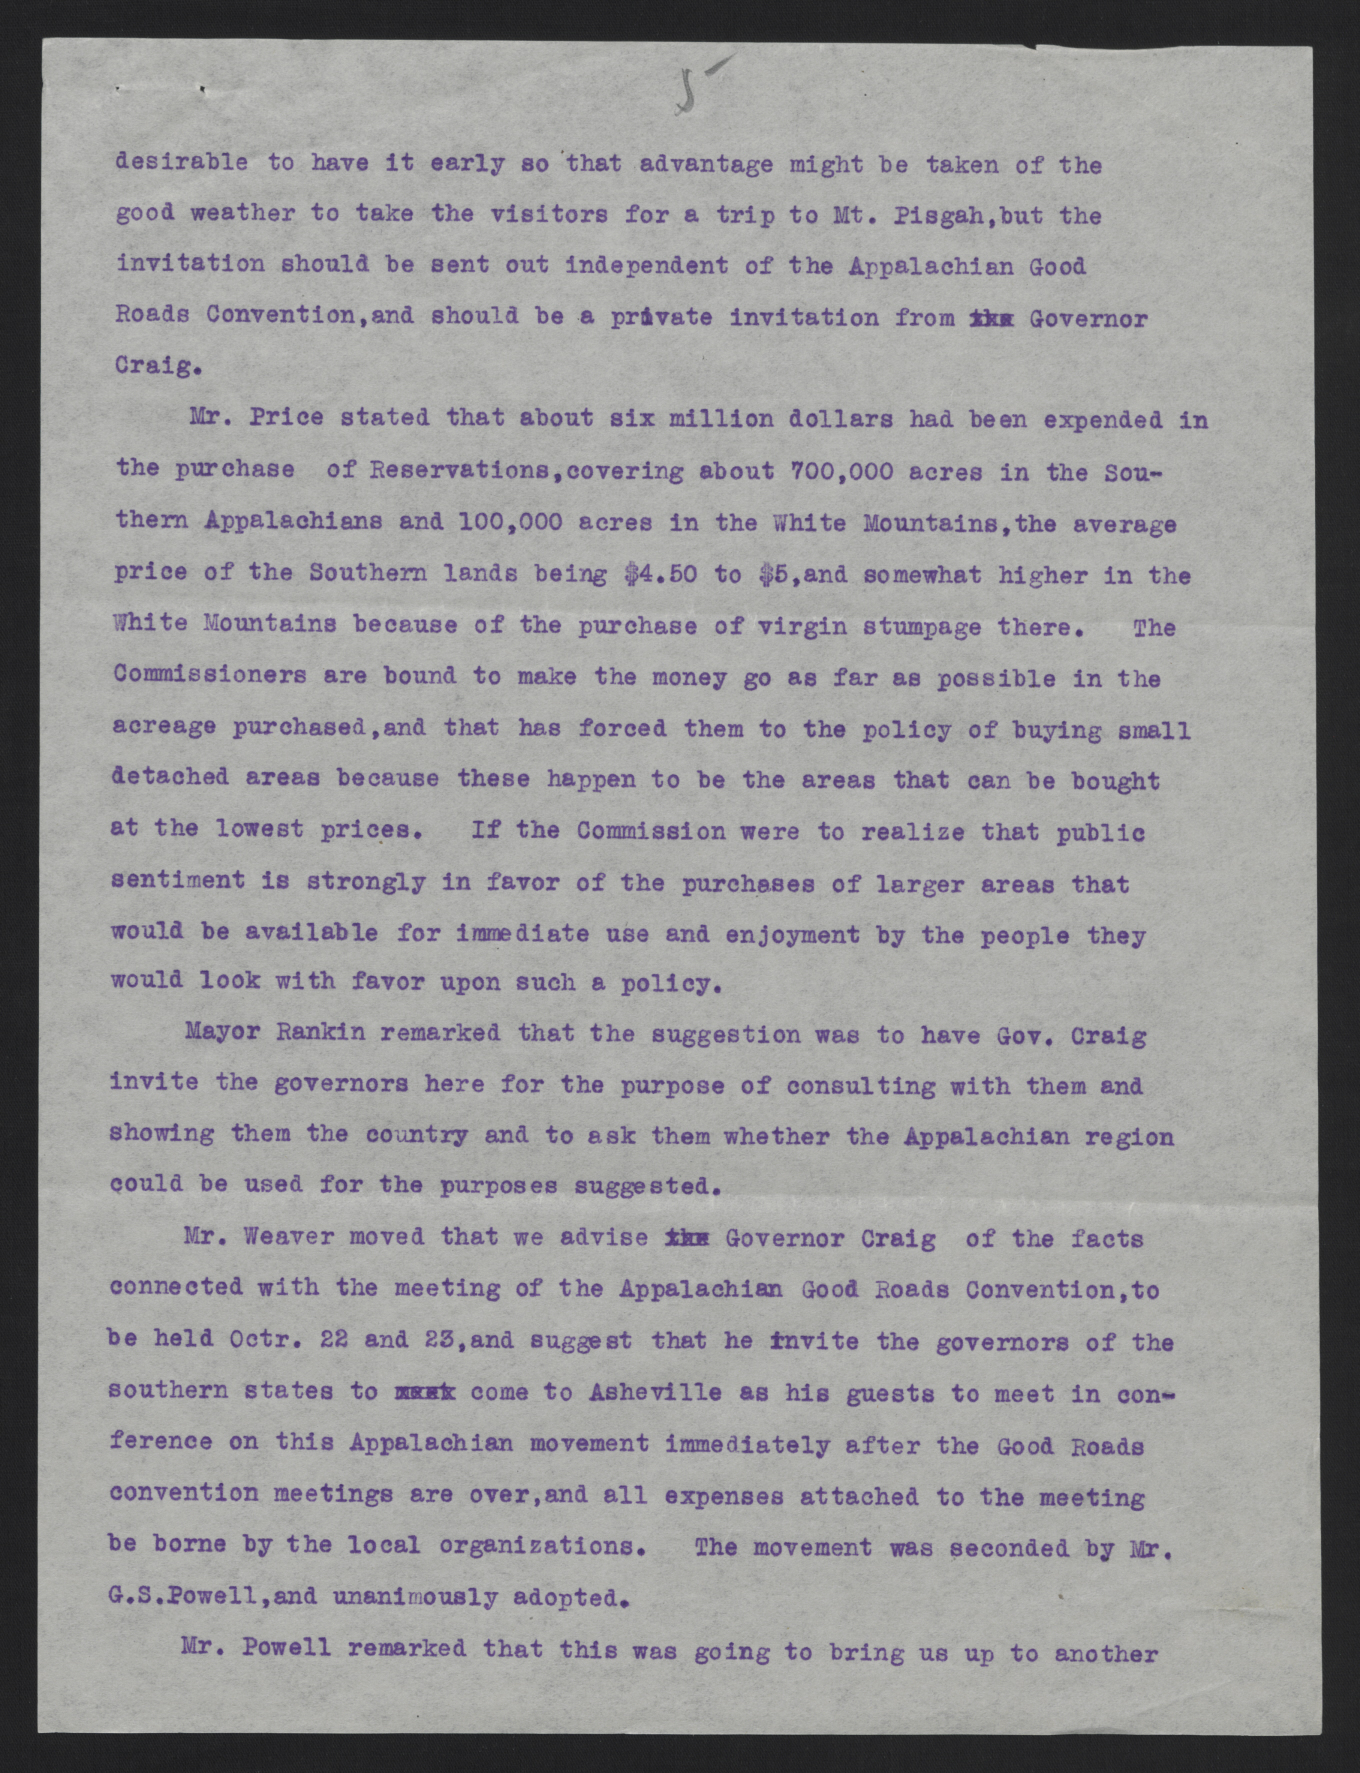 Meeting Minutes of the Greater Western North Carolina Association, 11 October 1913, page 5